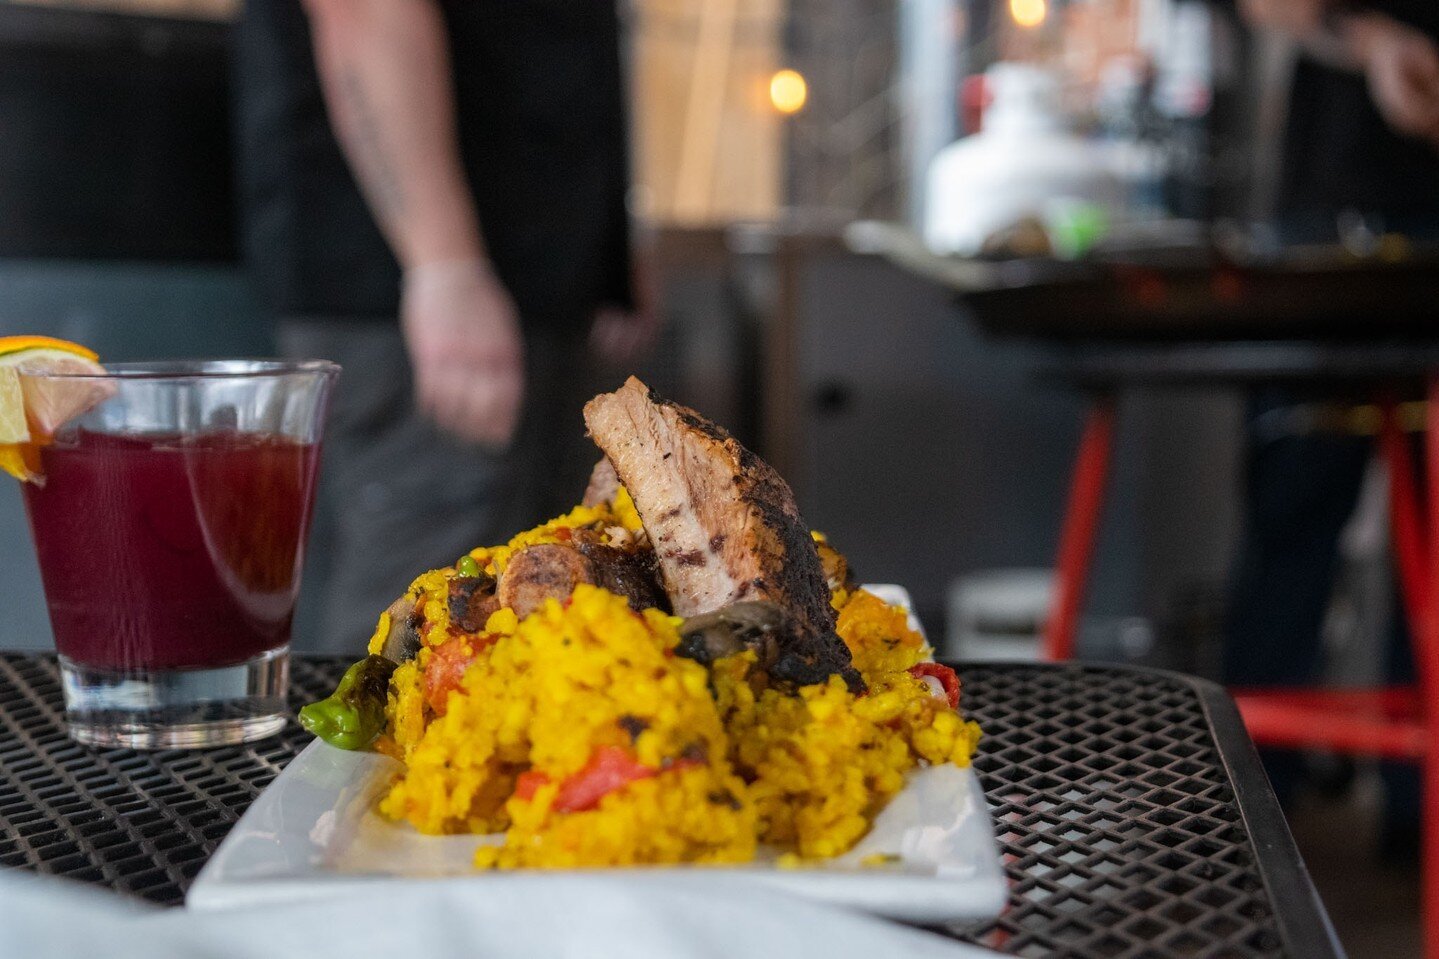 This is your sign to call and get a last-minute spot for Paella on the Patio this Sunday, May 21st! We have seatings at 12, 2:30, and 5pm, and this month's flavor is a Classic Mixta! Give us a call now--you'll be so glad you did.